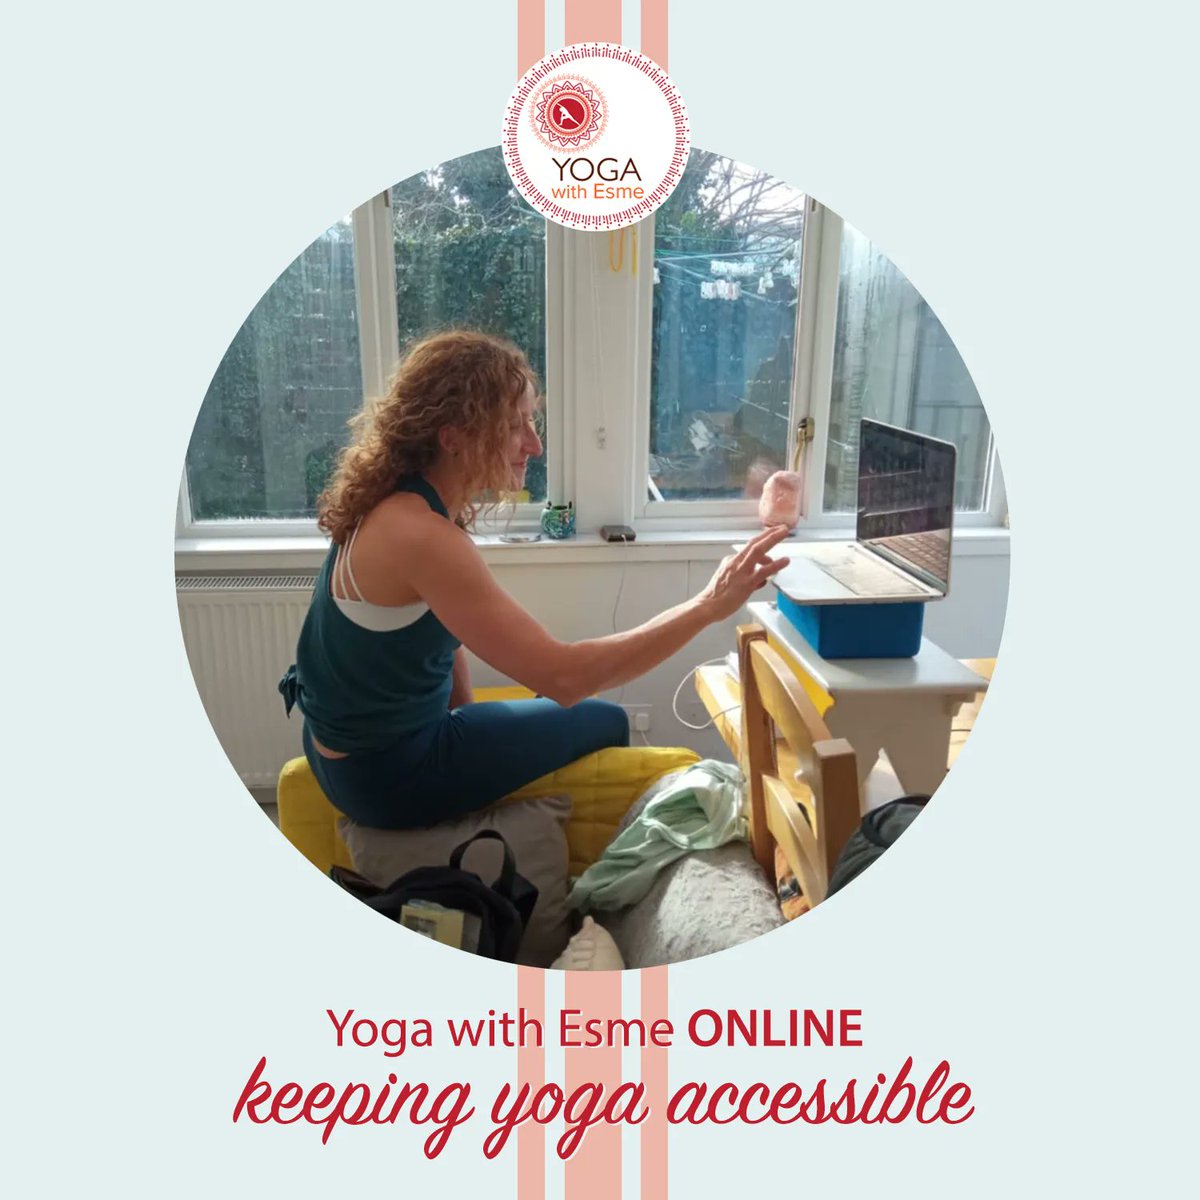 We like to keep our online classes just as intimate and comfortable as our in-person classes. We also like to keep them accessible! Save your pennies! 👉🏽 For 5 classes, follow this link: buff.ly/3okayif  👉🏽 For 10 classes, follow this link: buff.ly/3N5Y7kJ